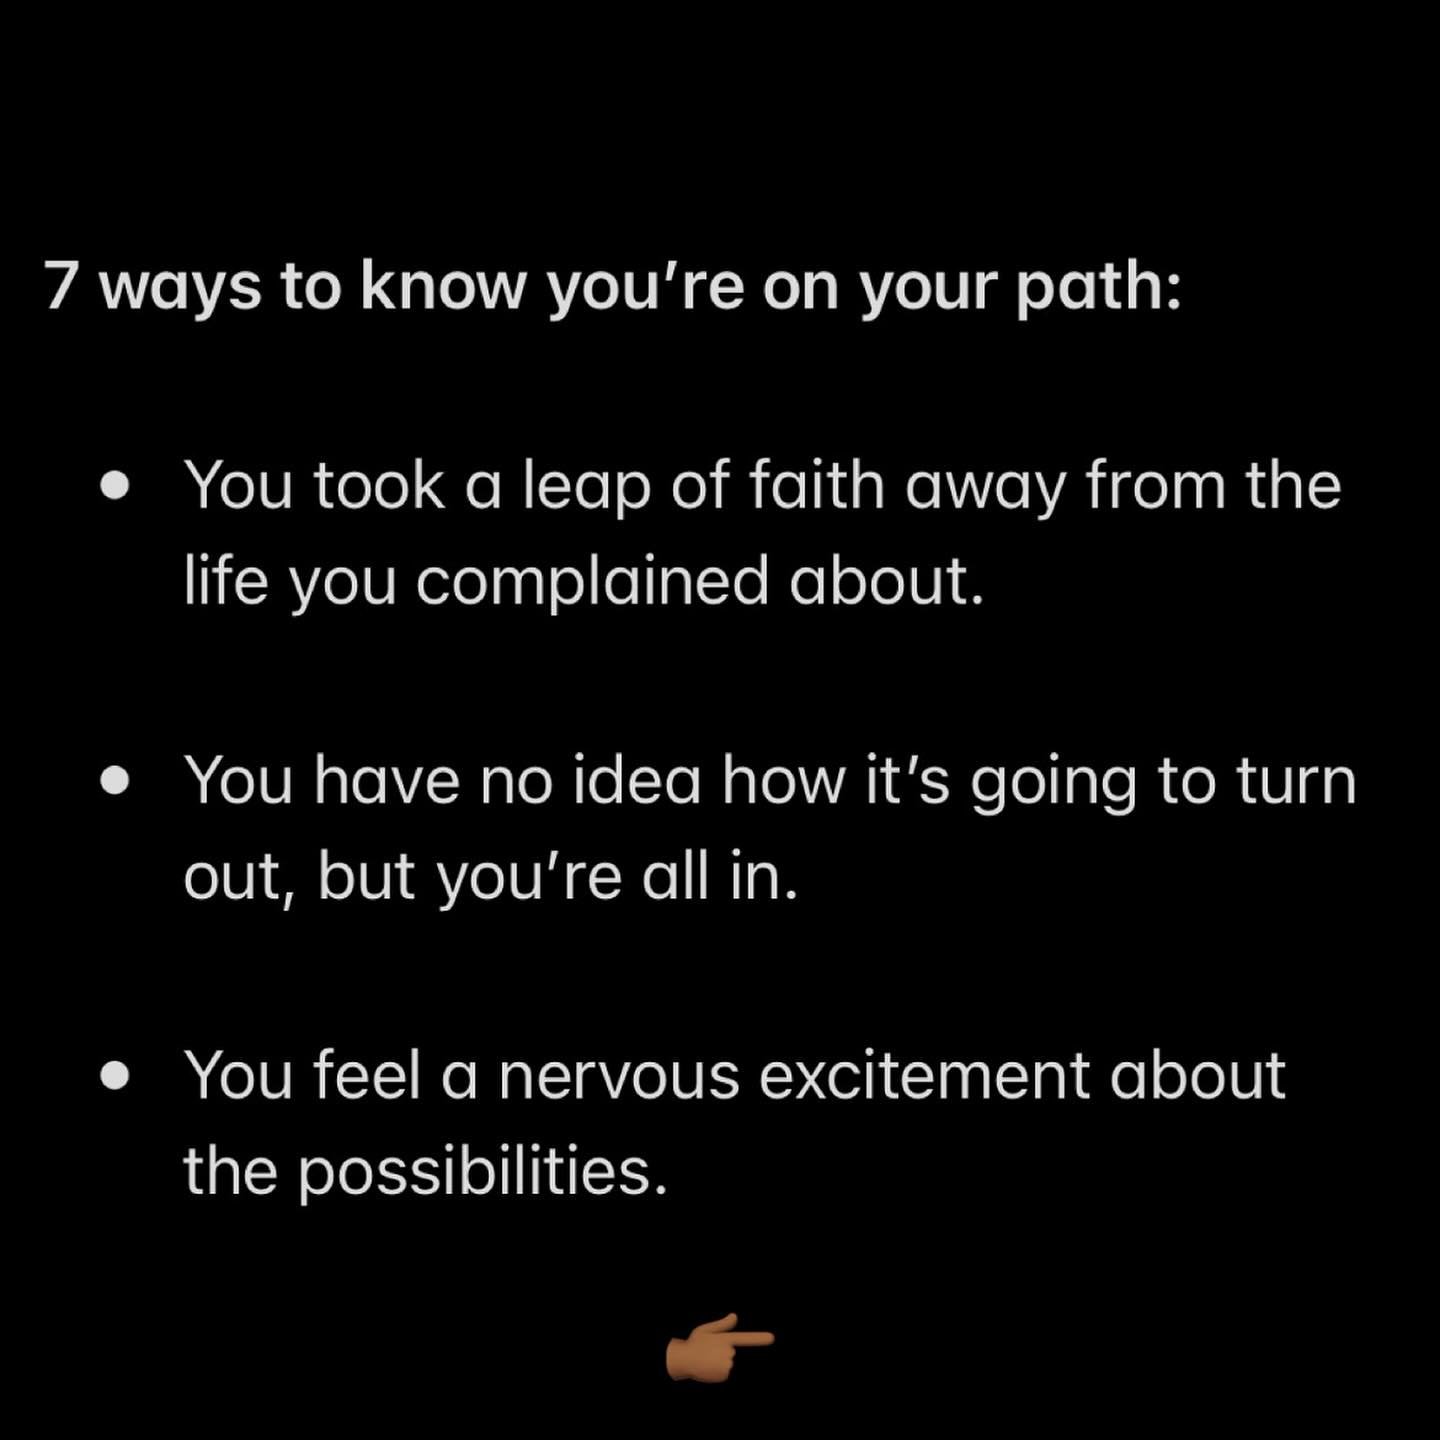 Your path is just one leap (or hop) from where you are right now. 

You can turn things around today if you wanted. 

When you&rsquo;re decisive, the fear that&rsquo;s been stopping you is the first thing that goes away. 

And you can just focus on t